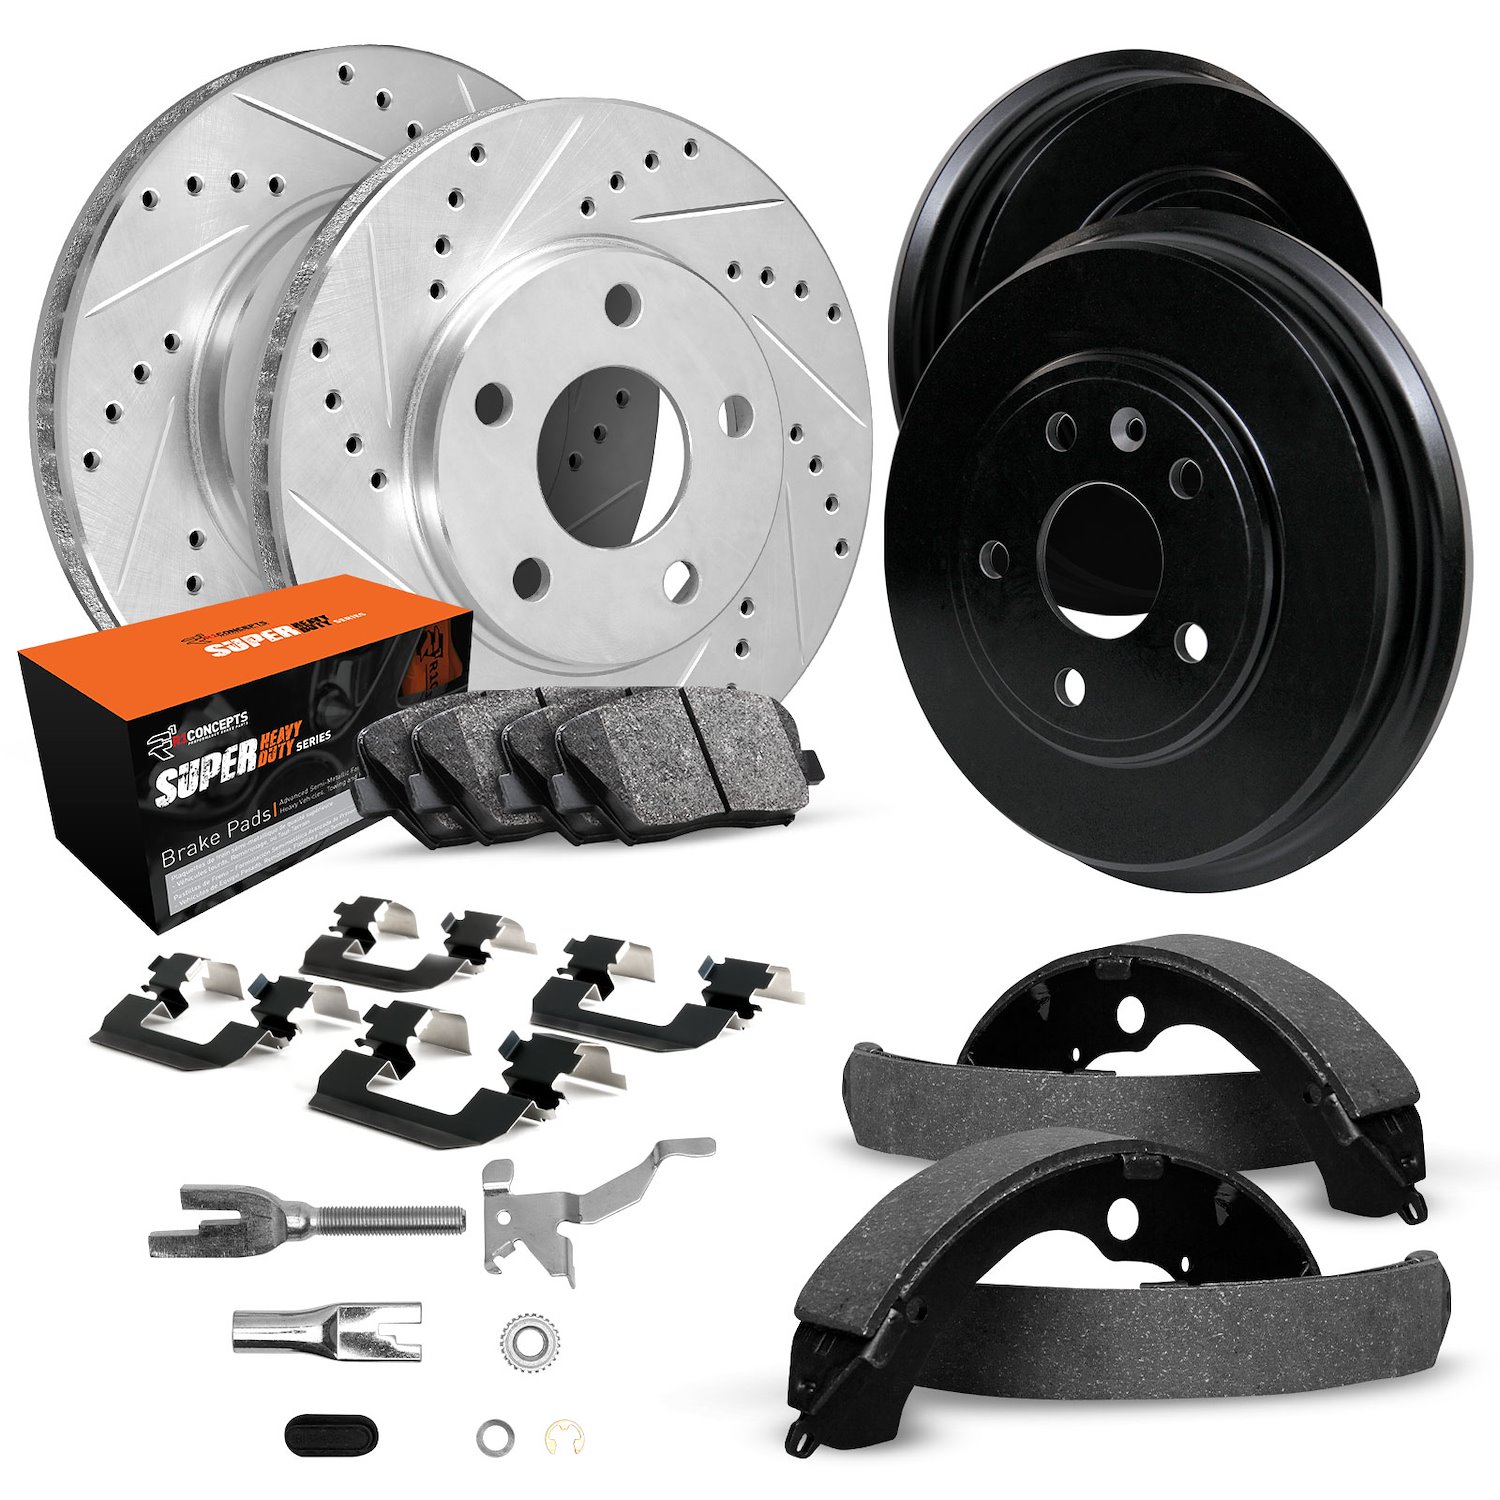 E-Line Drilled/Slotted Silver Rotor & Drum Set w/Super-Duty Pads, Shoes/Hardware/Adjusters, 1998-2002 Ford/Lincoln/Mercury/Mazda